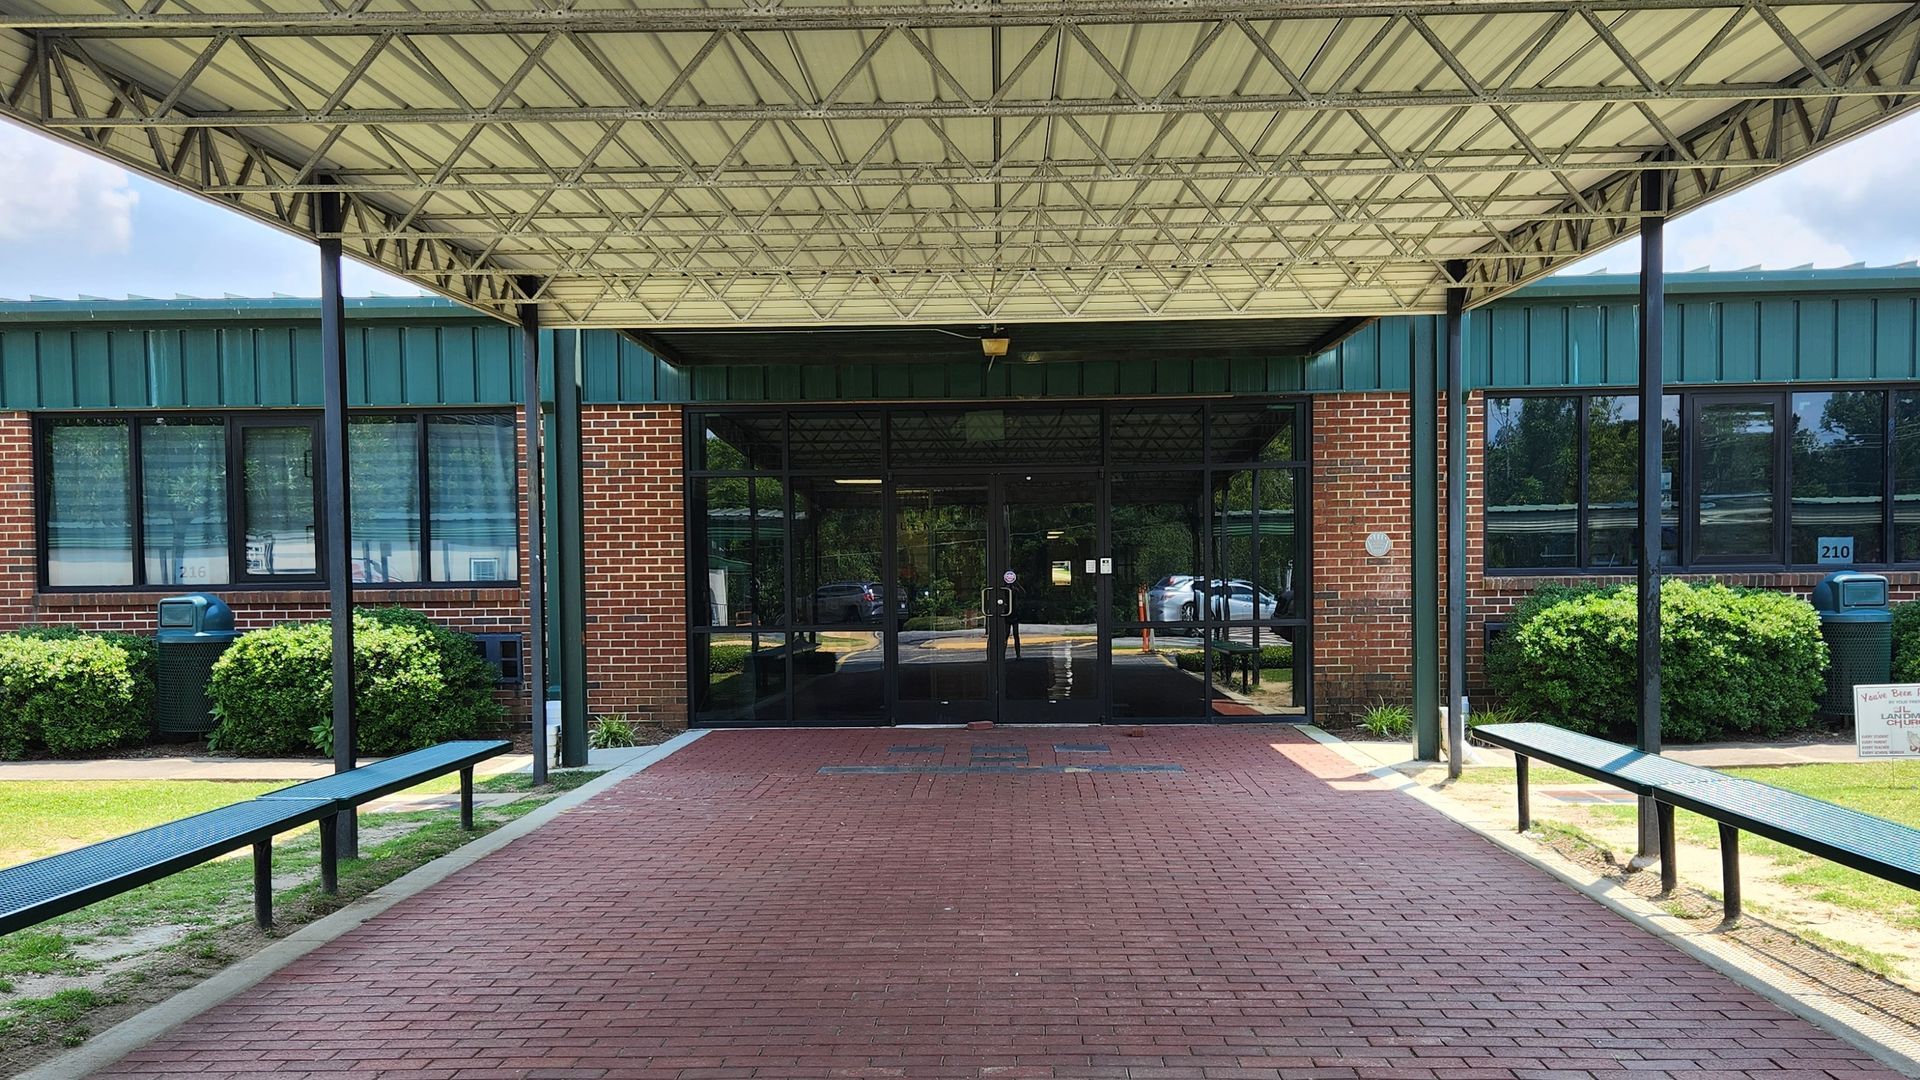 security film Auburn Opelika Smiths Station - Now the highest level of deterrant and .defense has been added to school windows and glass doors. Preventing forced entry through glass with SPF Security Film in AL